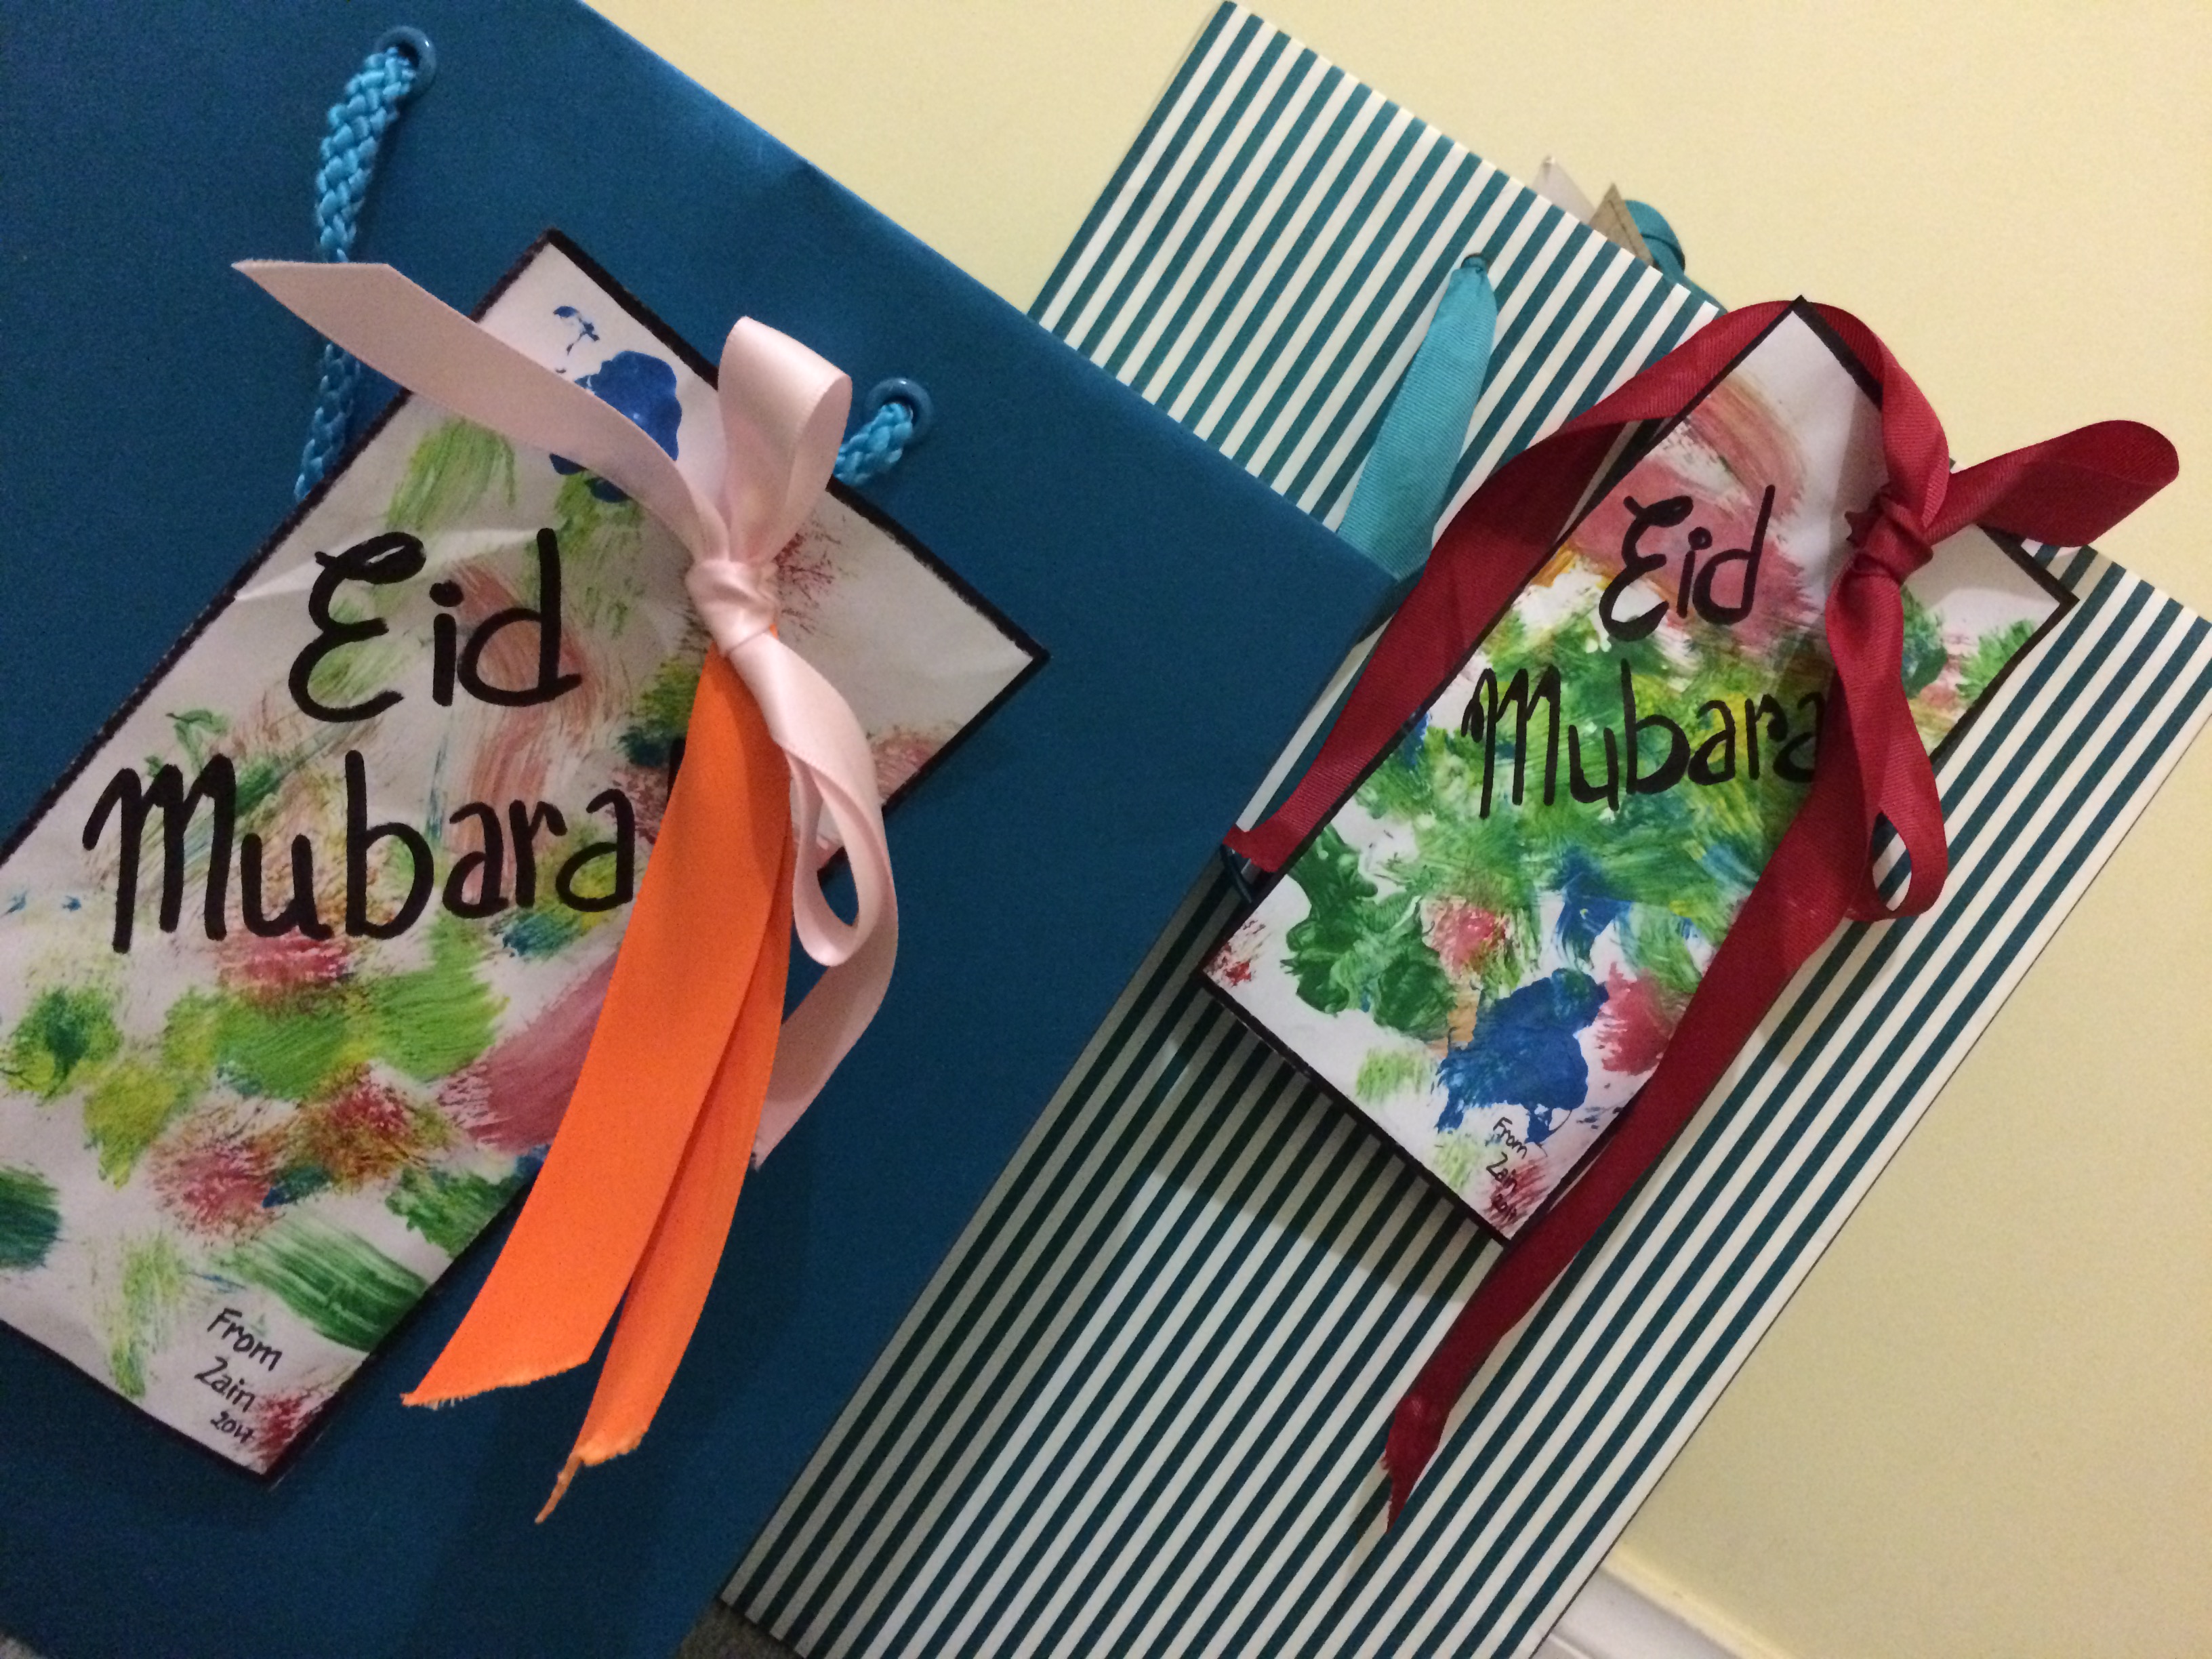 Eid gifts with handmade cards